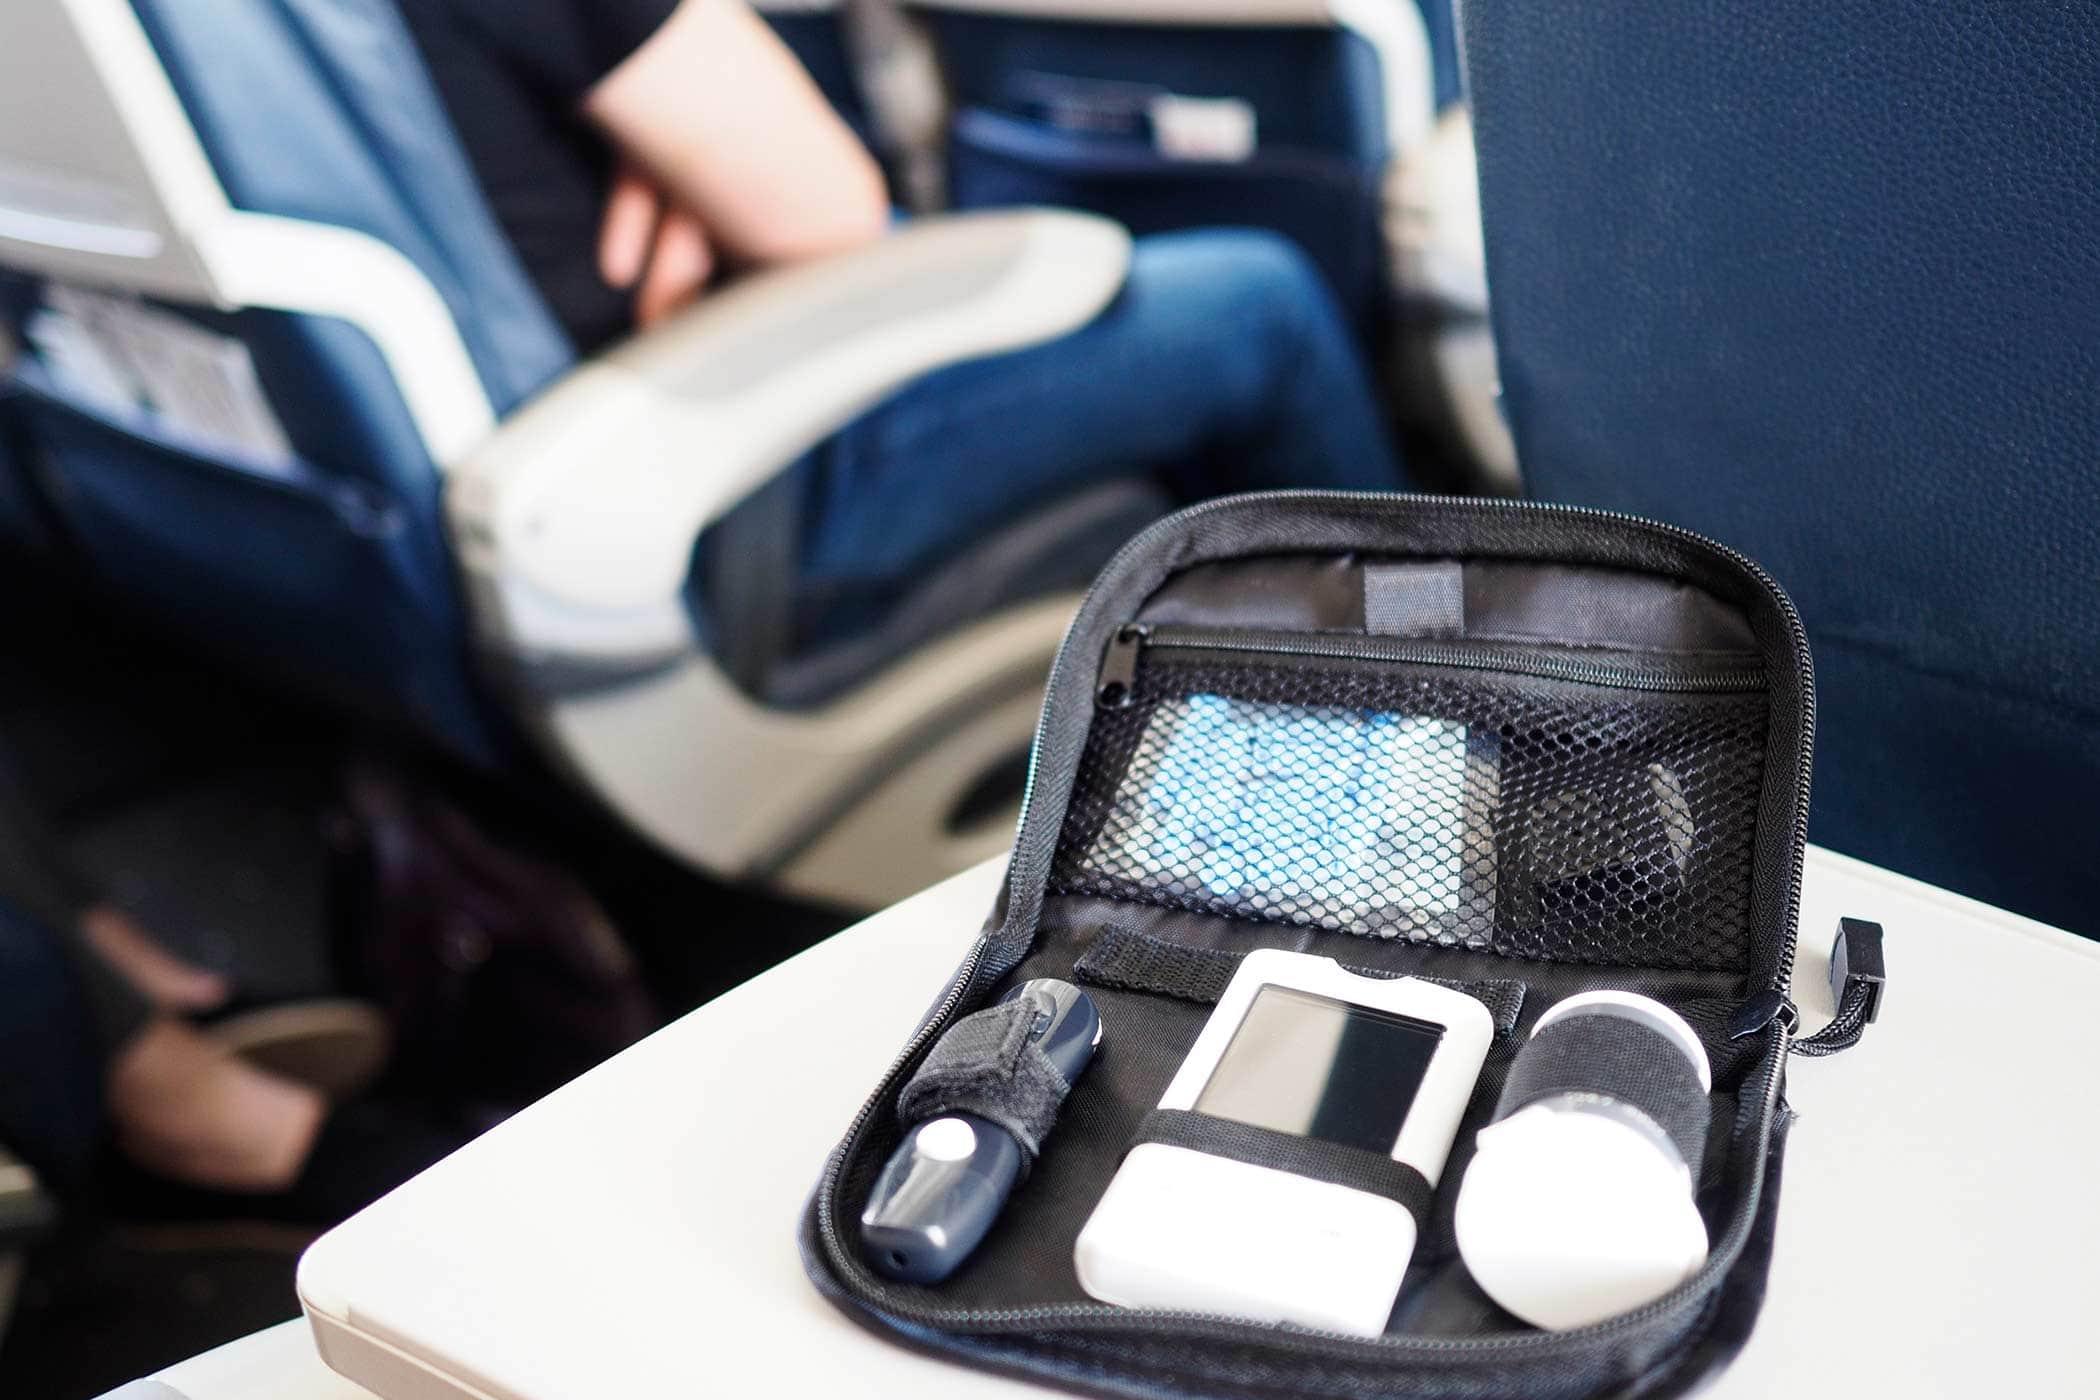 Traveling by plane when you are diabetic?